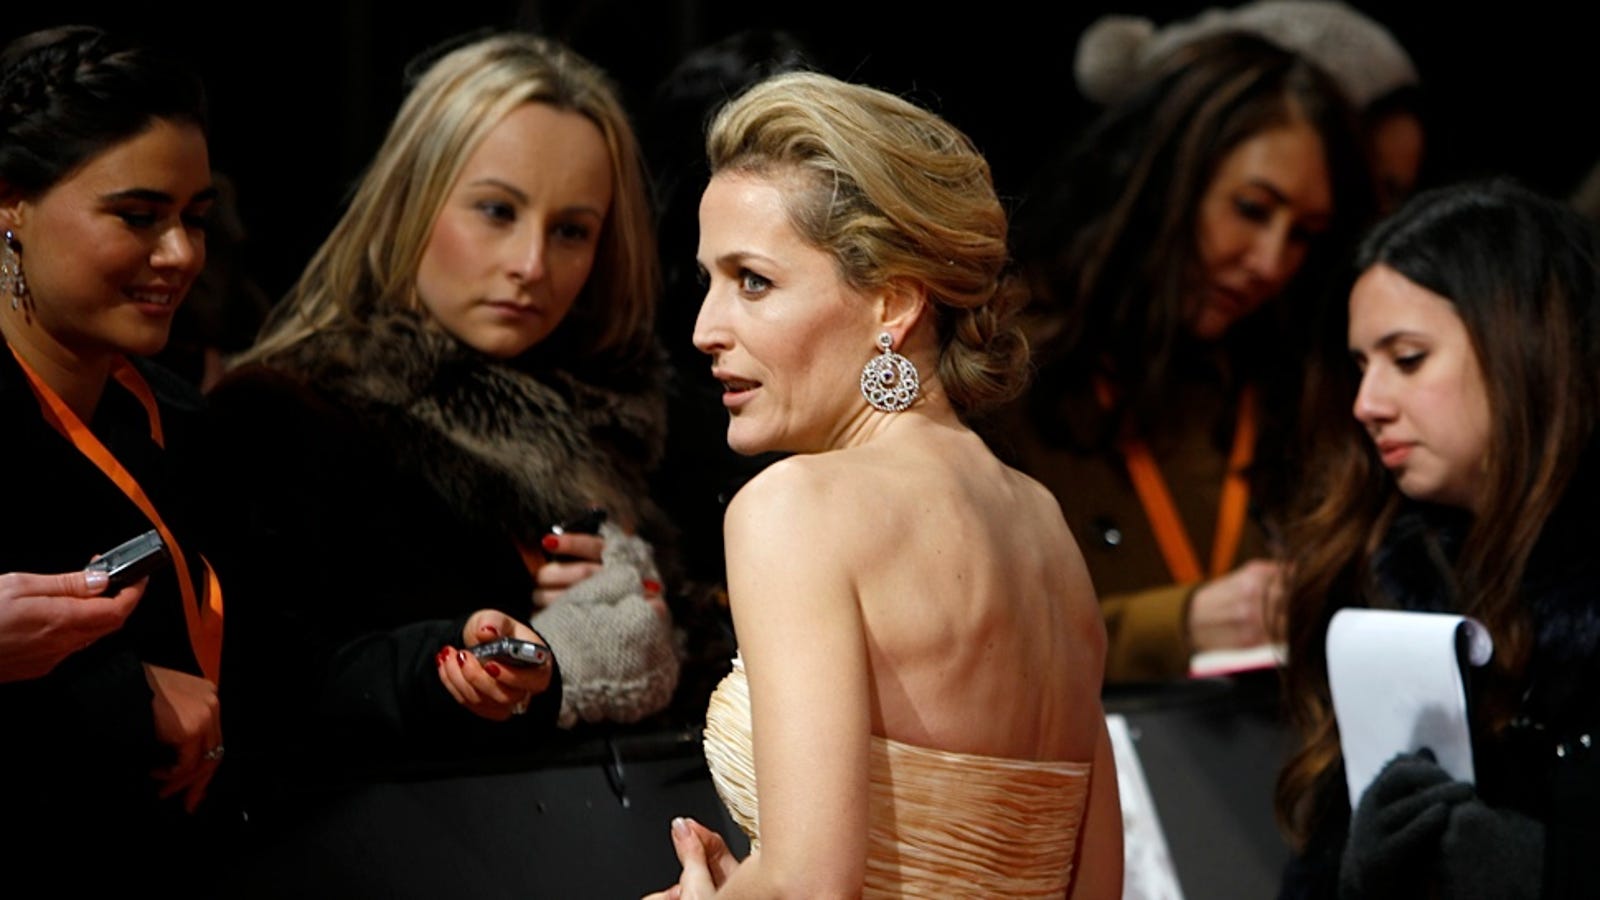 Gillian Anderson Would Rather Her Daughter Not Chase After Men